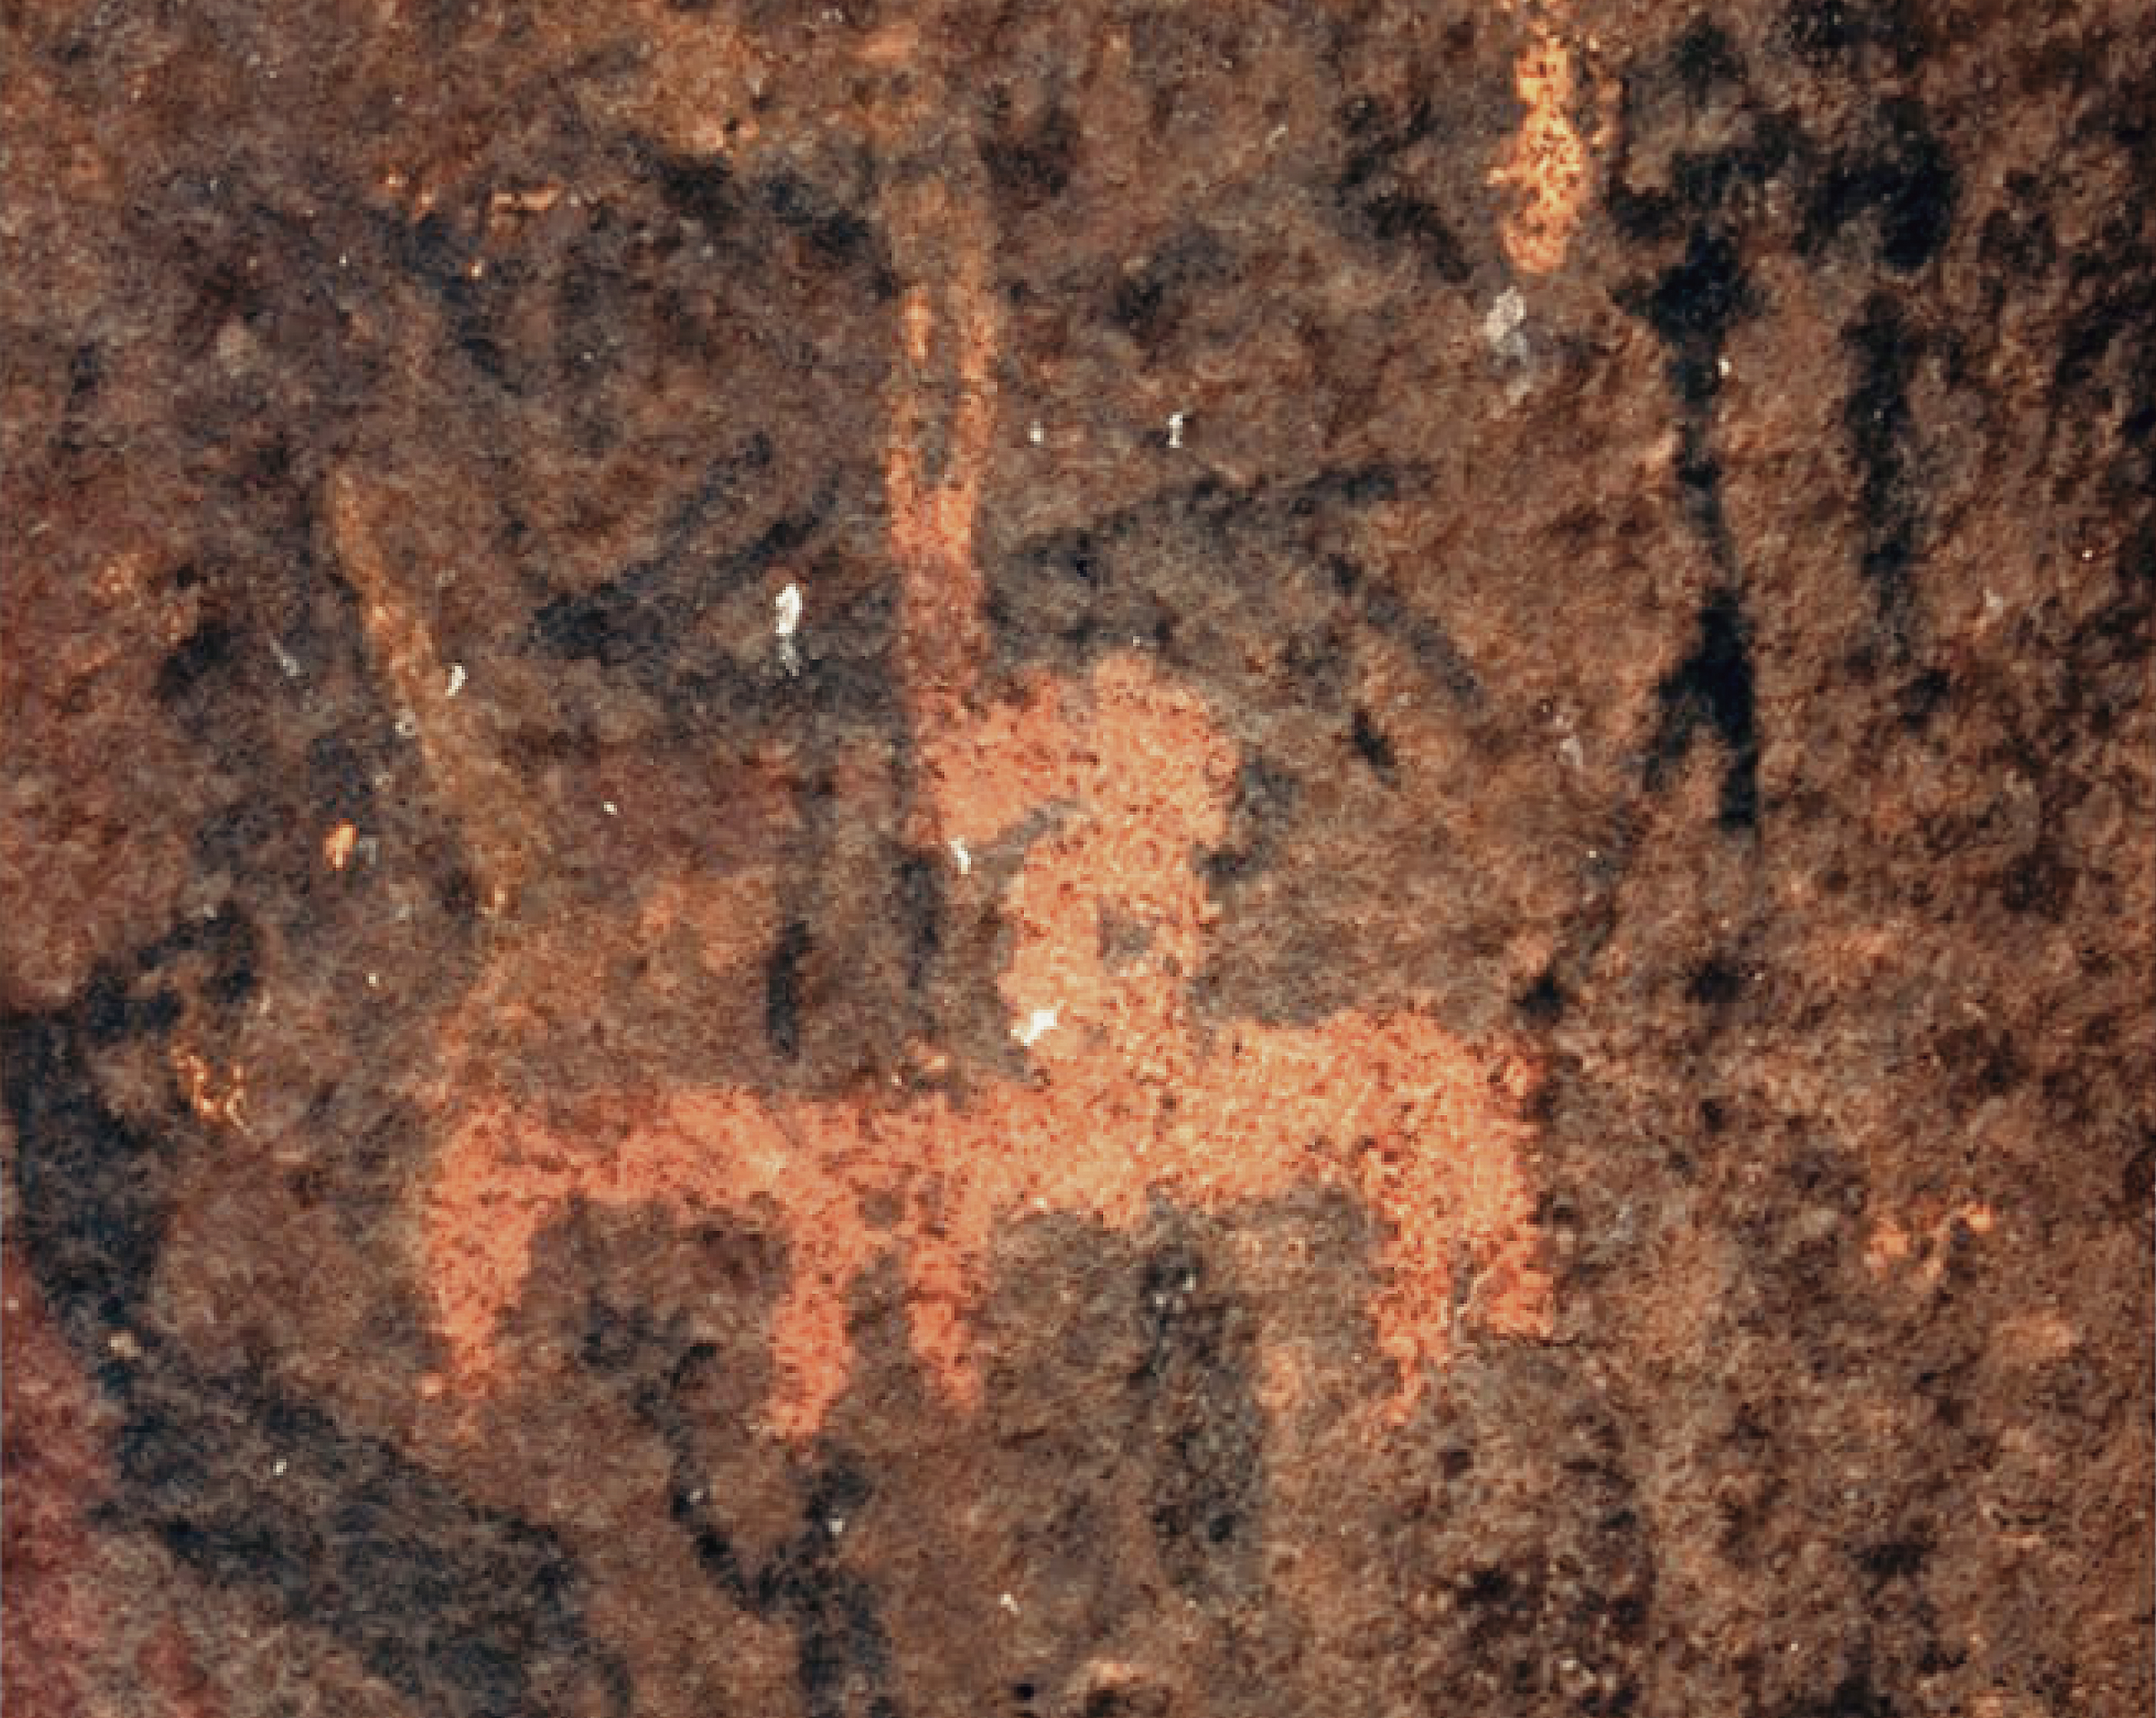 Finger-painted and fine-line horses from the shelter along the Mancazana River that attest to the mixed nature of these bandit groups as described by Pringle (1840: 77). Scale is indicated by the width of the finger painting